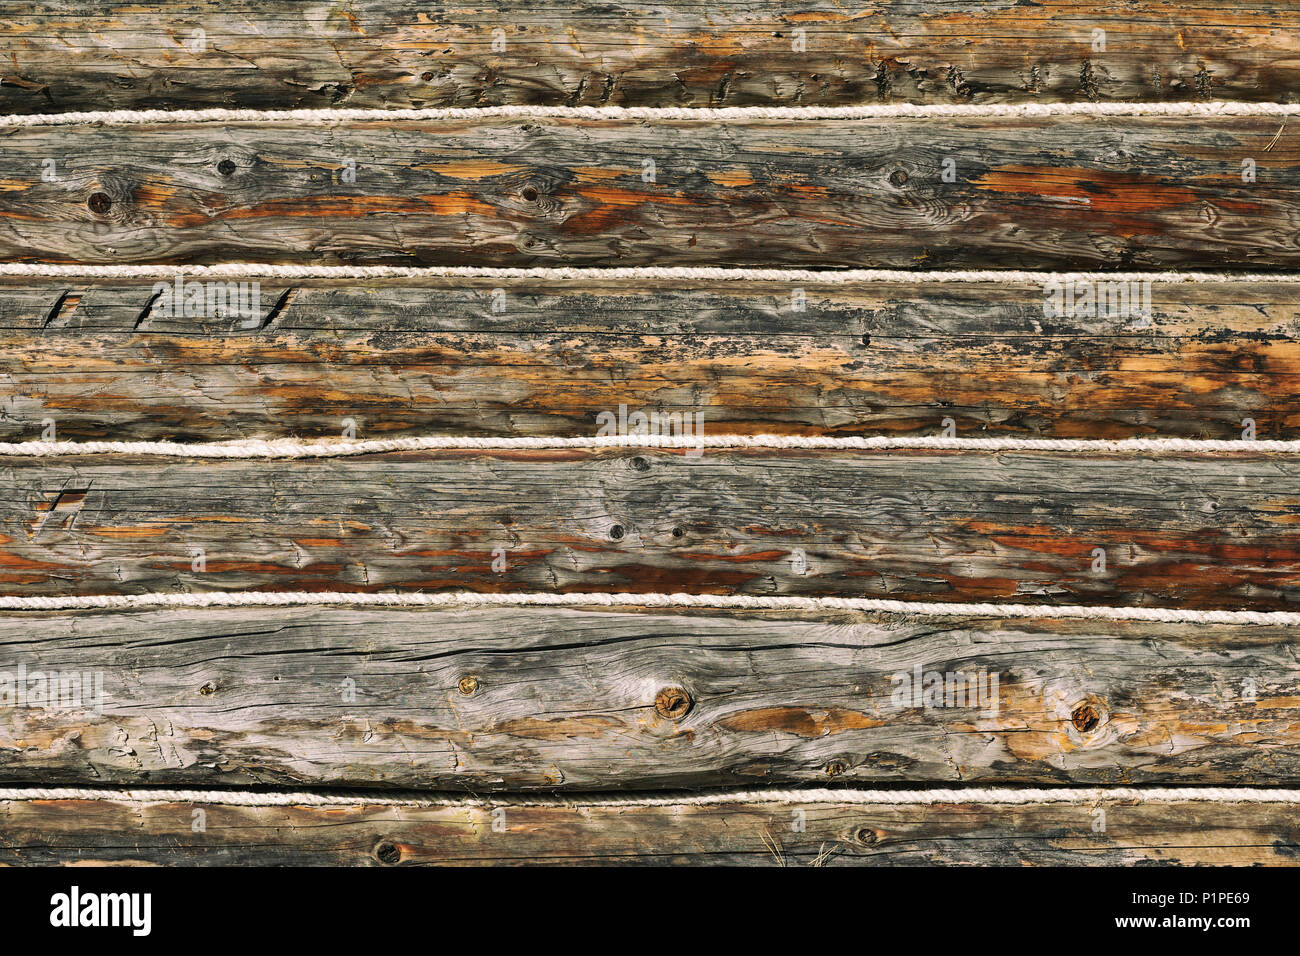 Vintage wooden planks with cracks, scratches for modern grunge design, patterns, background, copy space. Natural wooden surface, texture. Stock Photo